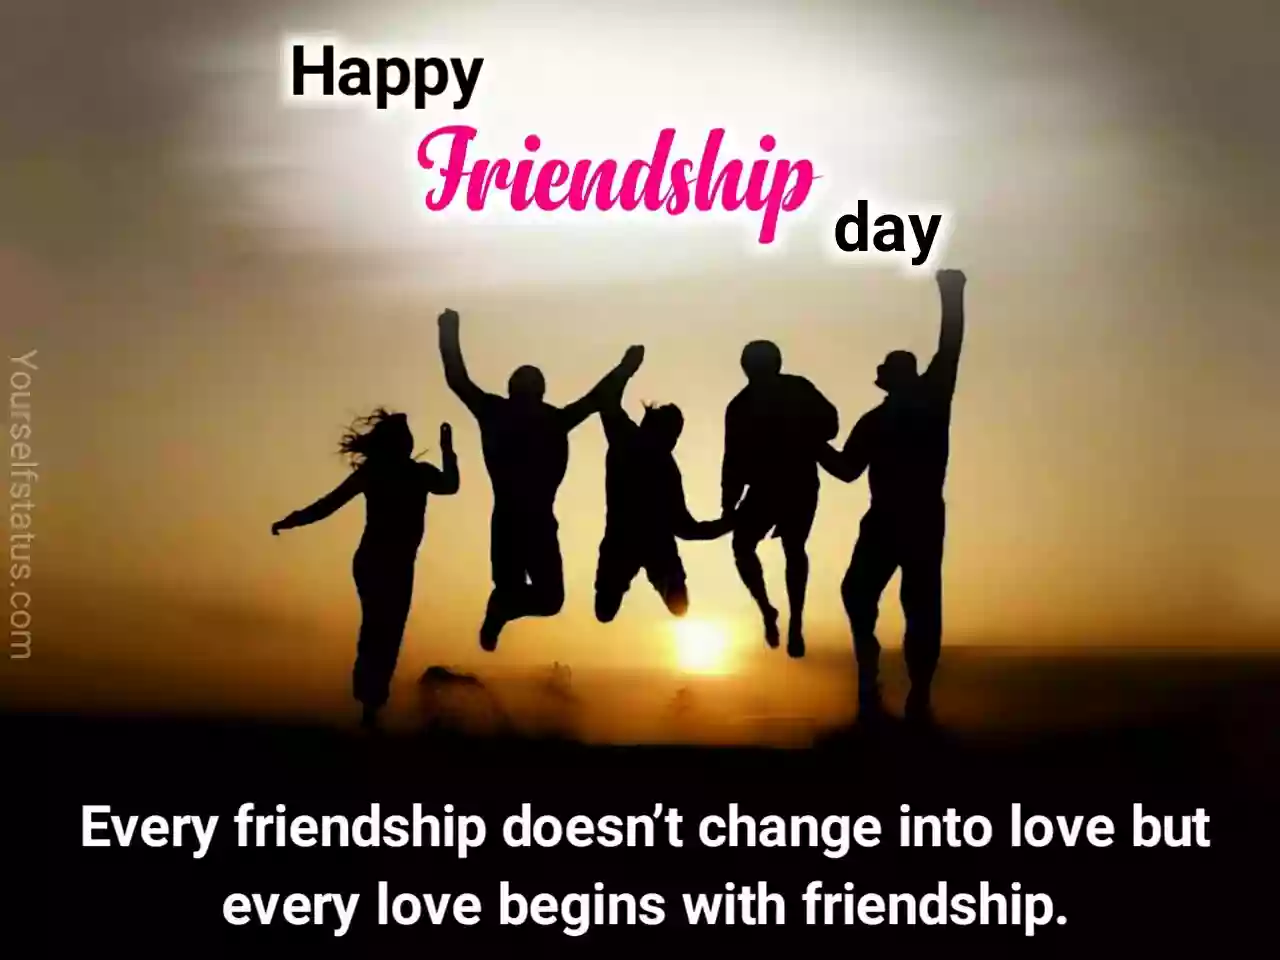 Friendship day wishes for best friends